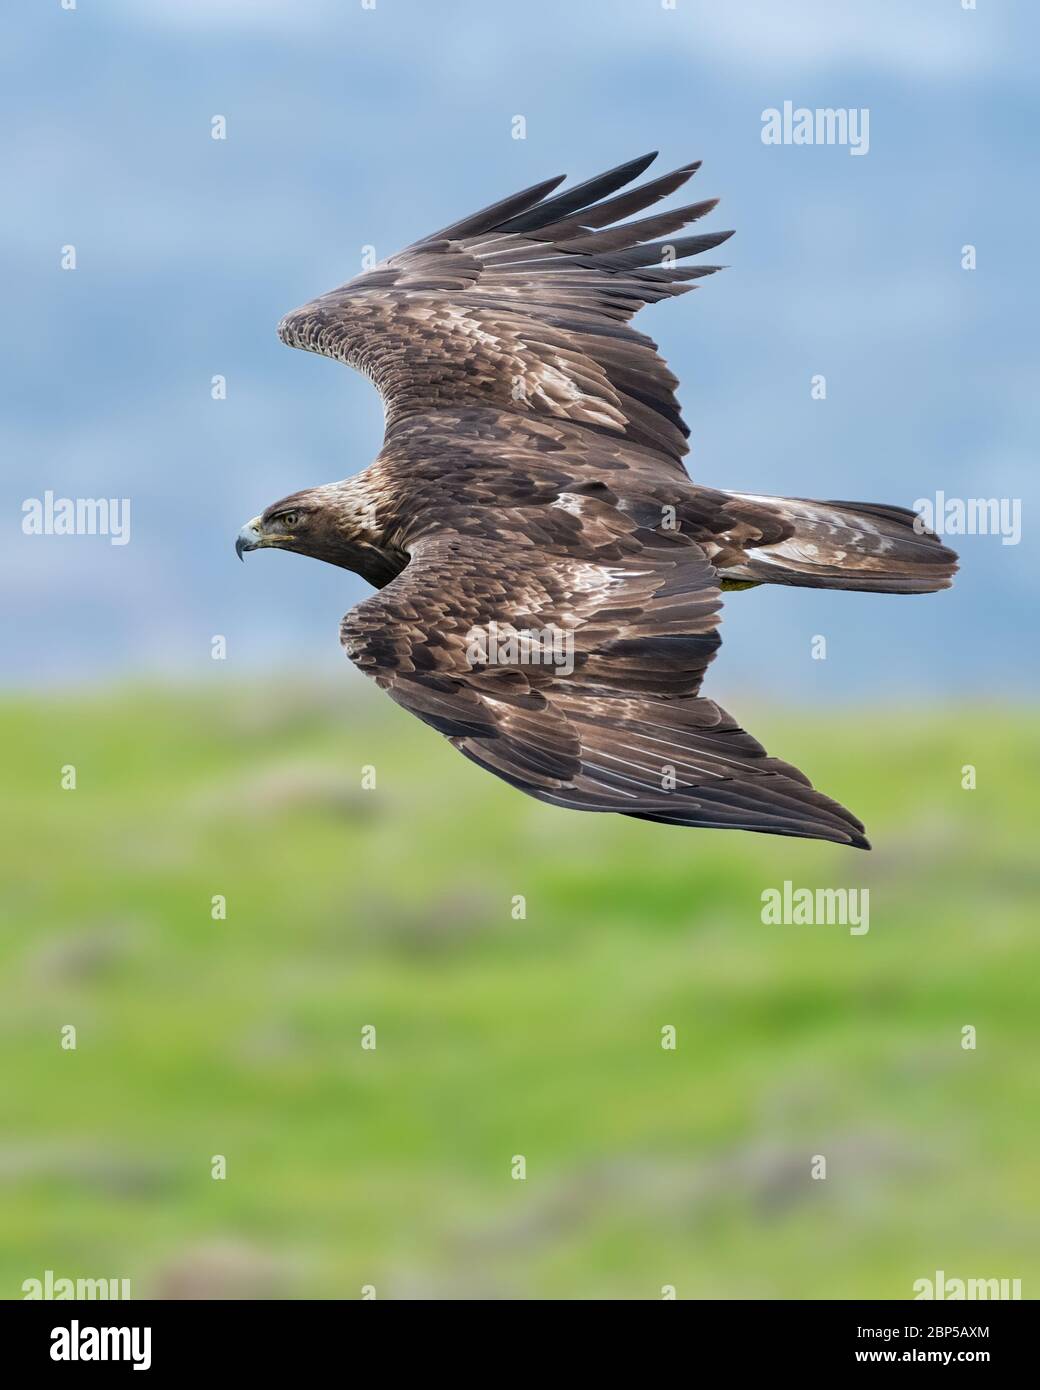 A Golden Eagle tucks its wings for a burst of speed while hunting California Ground Squirrels in the hills. They can reach 150 mph while hunting. Stock Photo